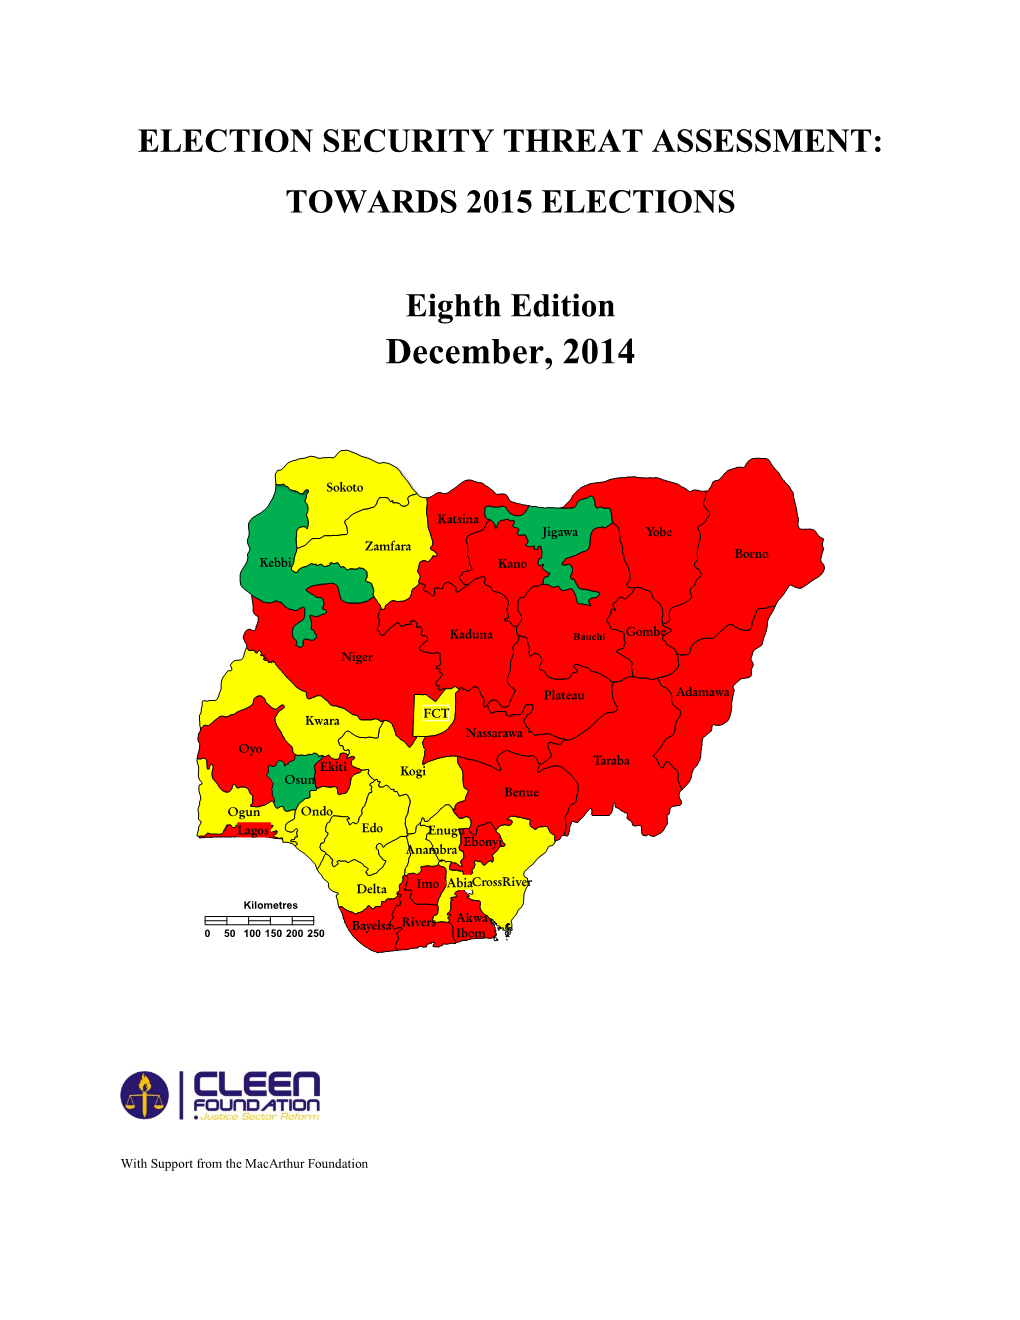 Election Security Threat Assessment: Towards 2015 Elections